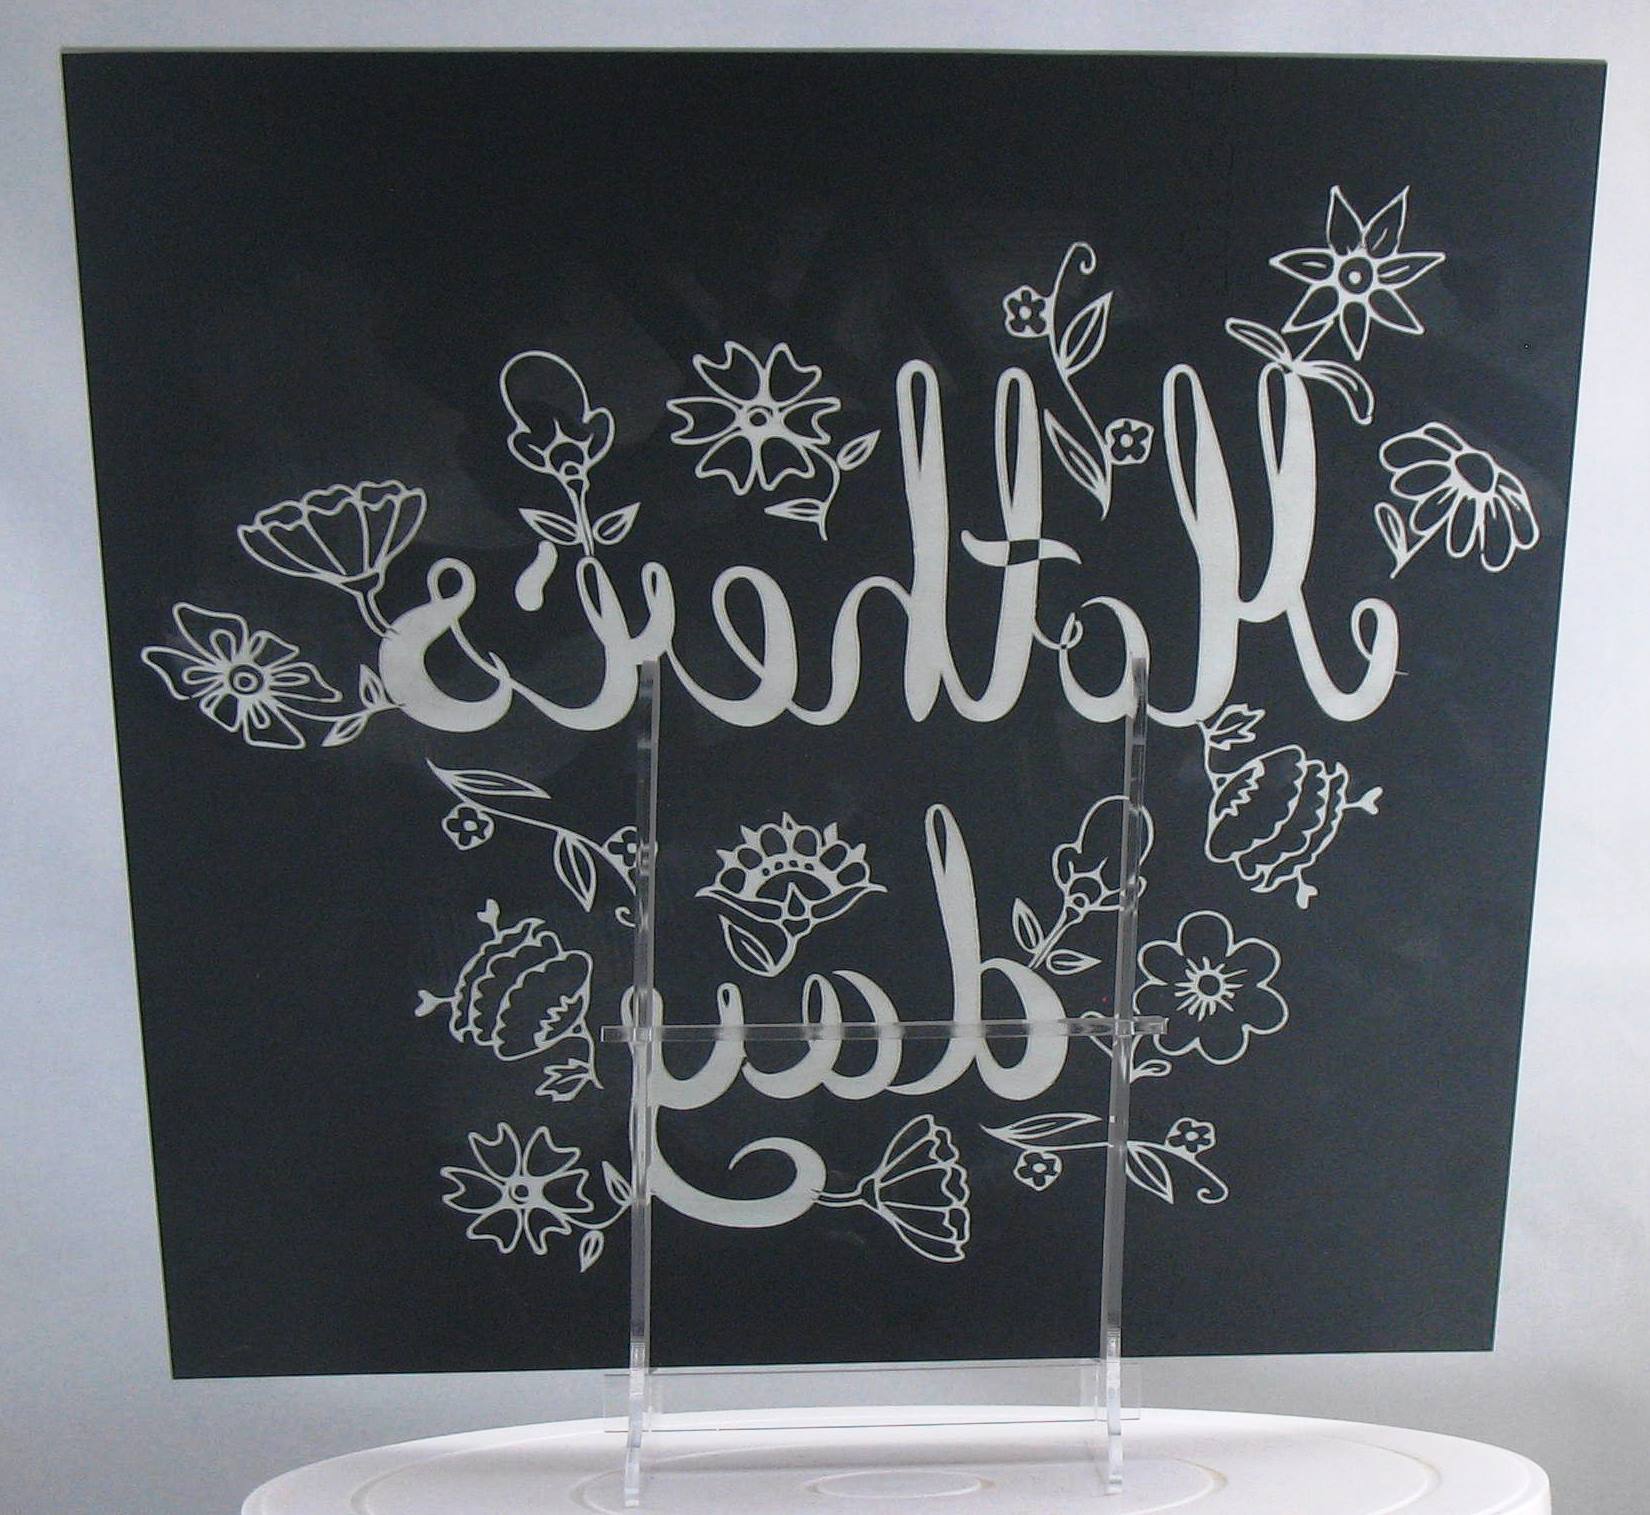 Mother's Day Engraved Mirror Tile